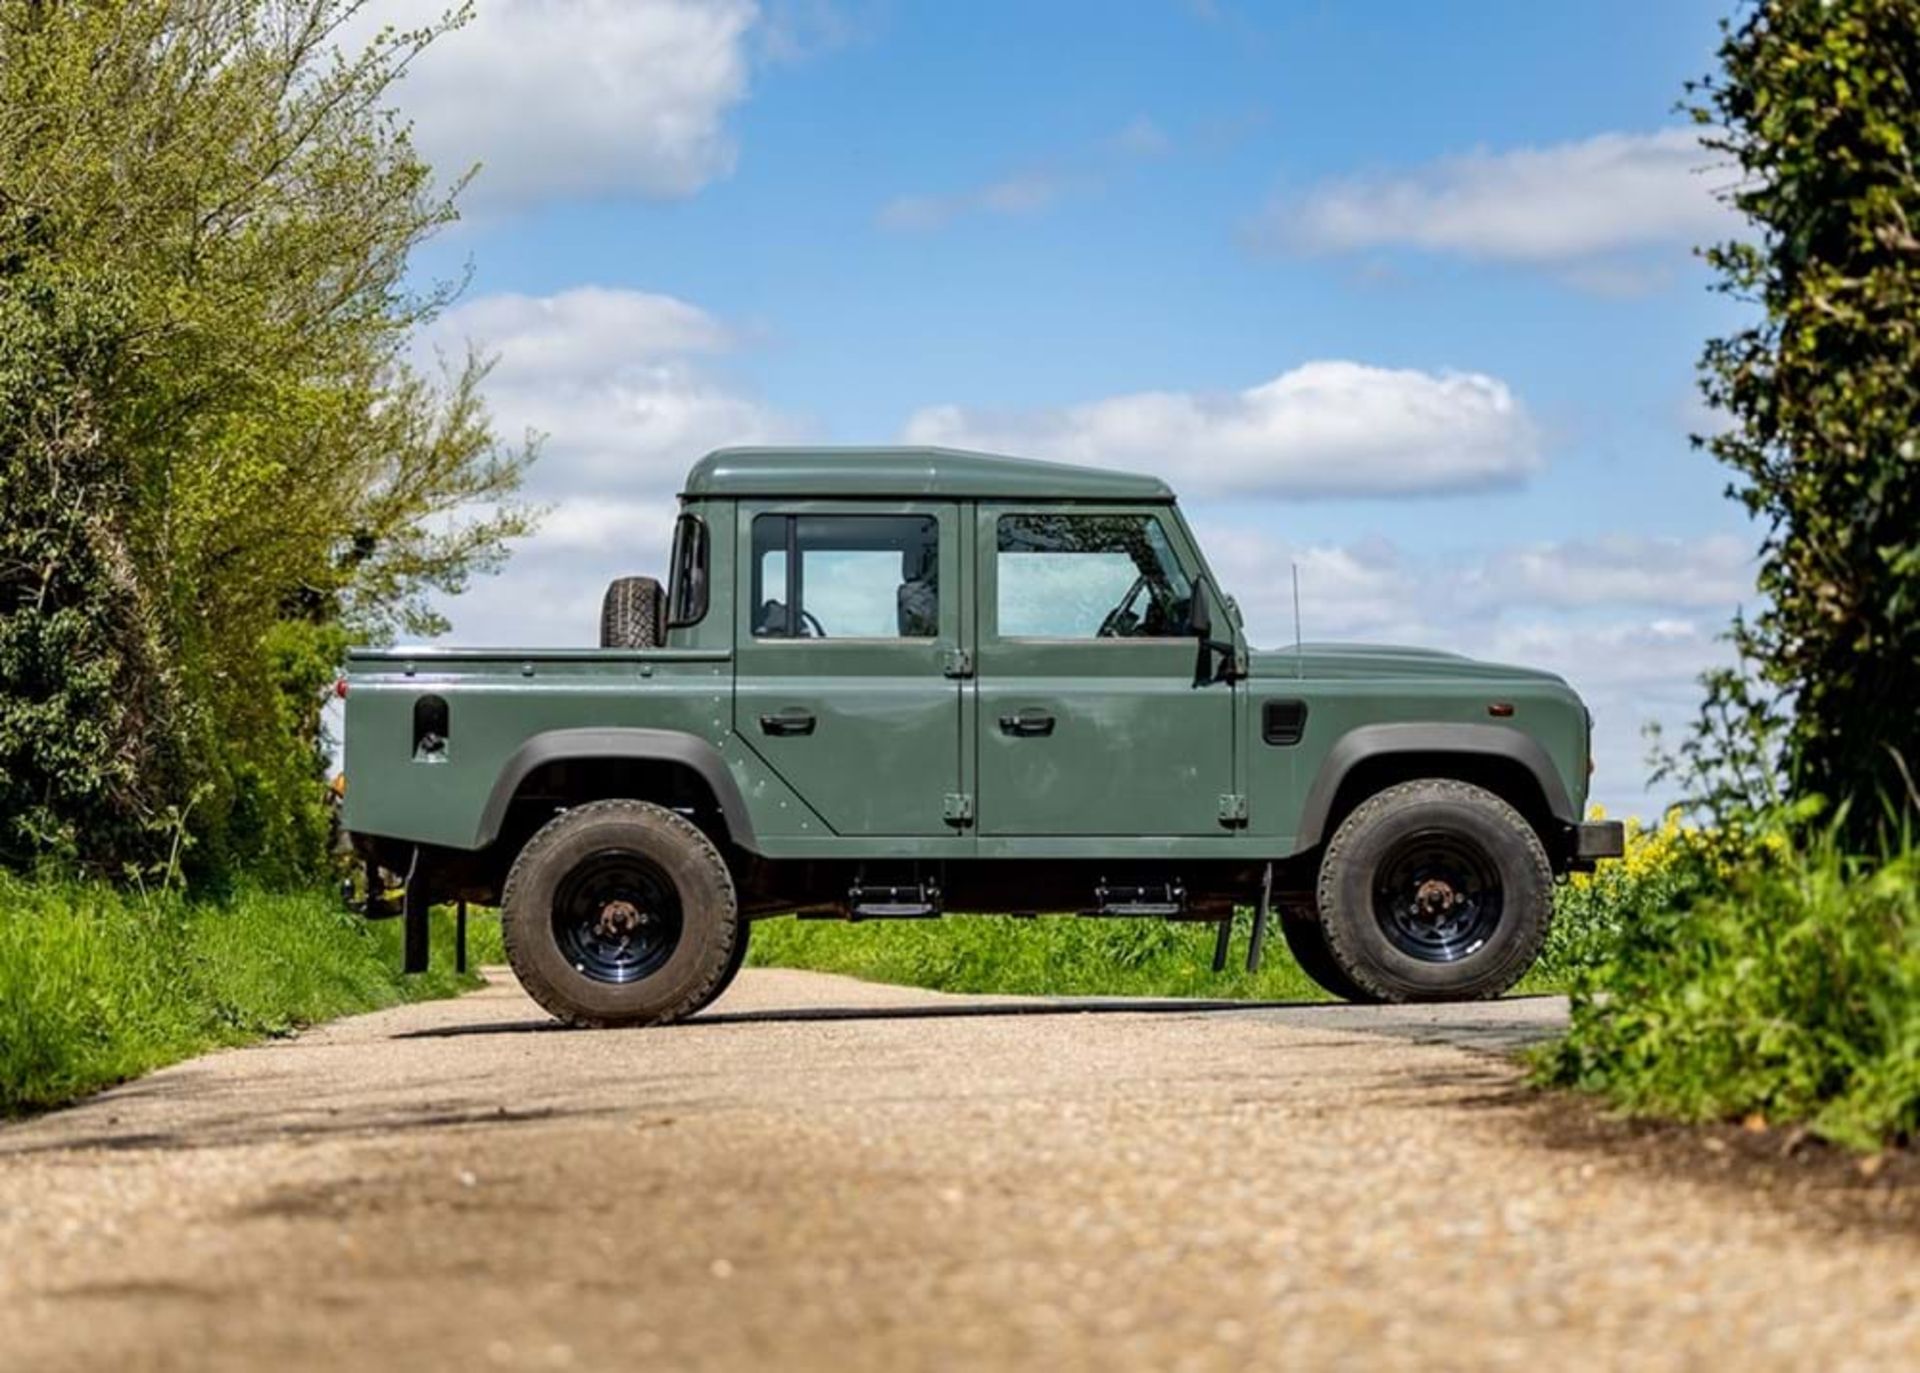 2012 Land Rover Defender Double Cab Pick-up - Image 4 of 10